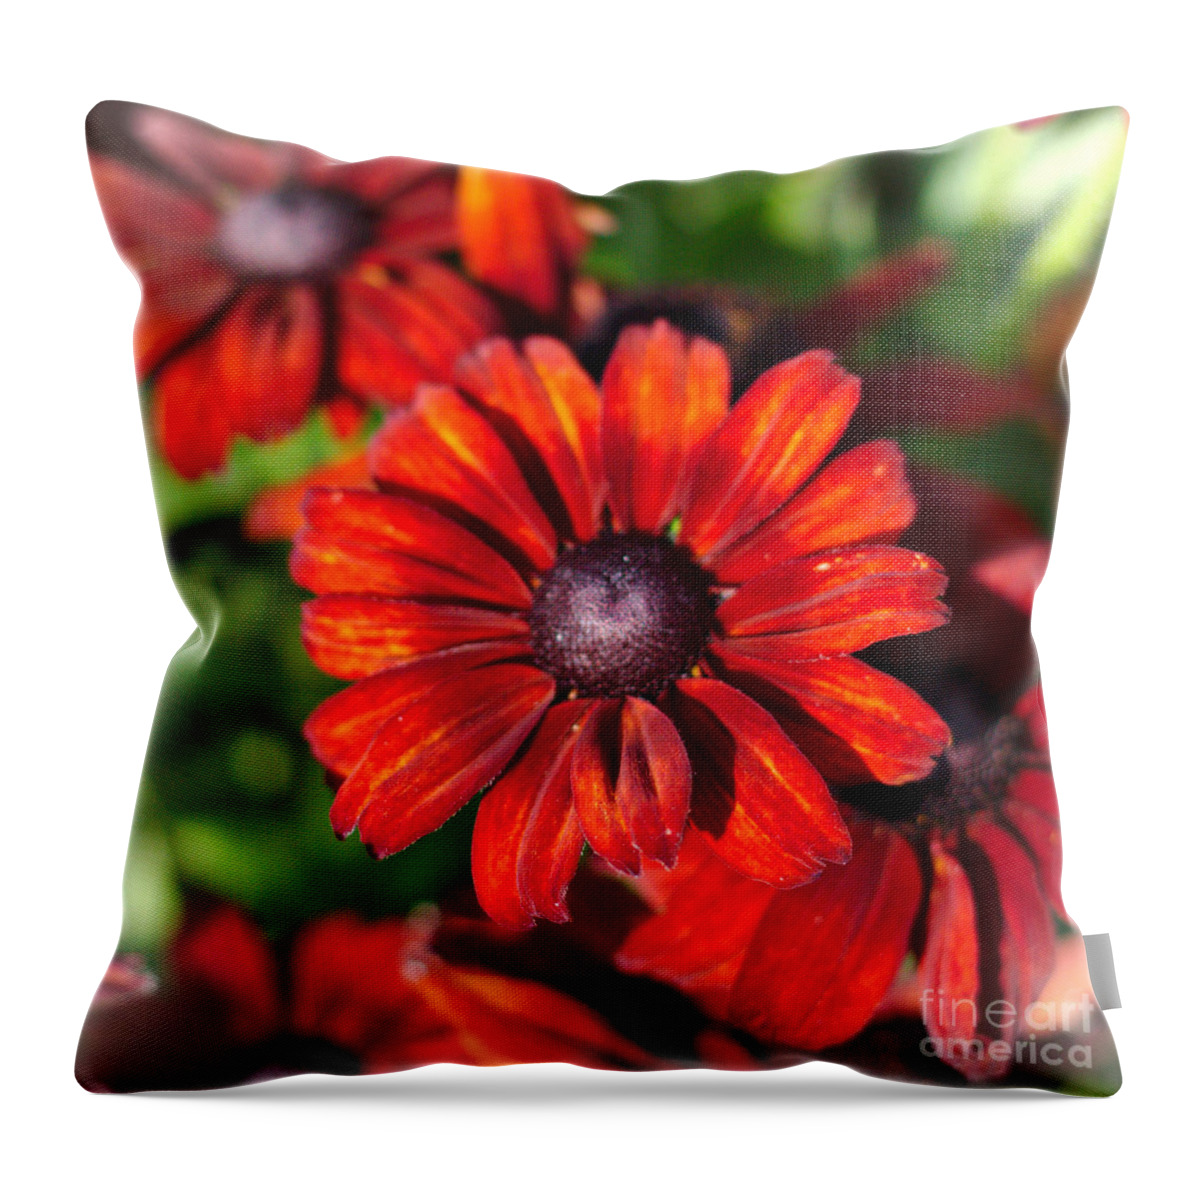 Flowers Throw Pillow featuring the photograph Autumn Flowers #1 by Jeremy Hayden